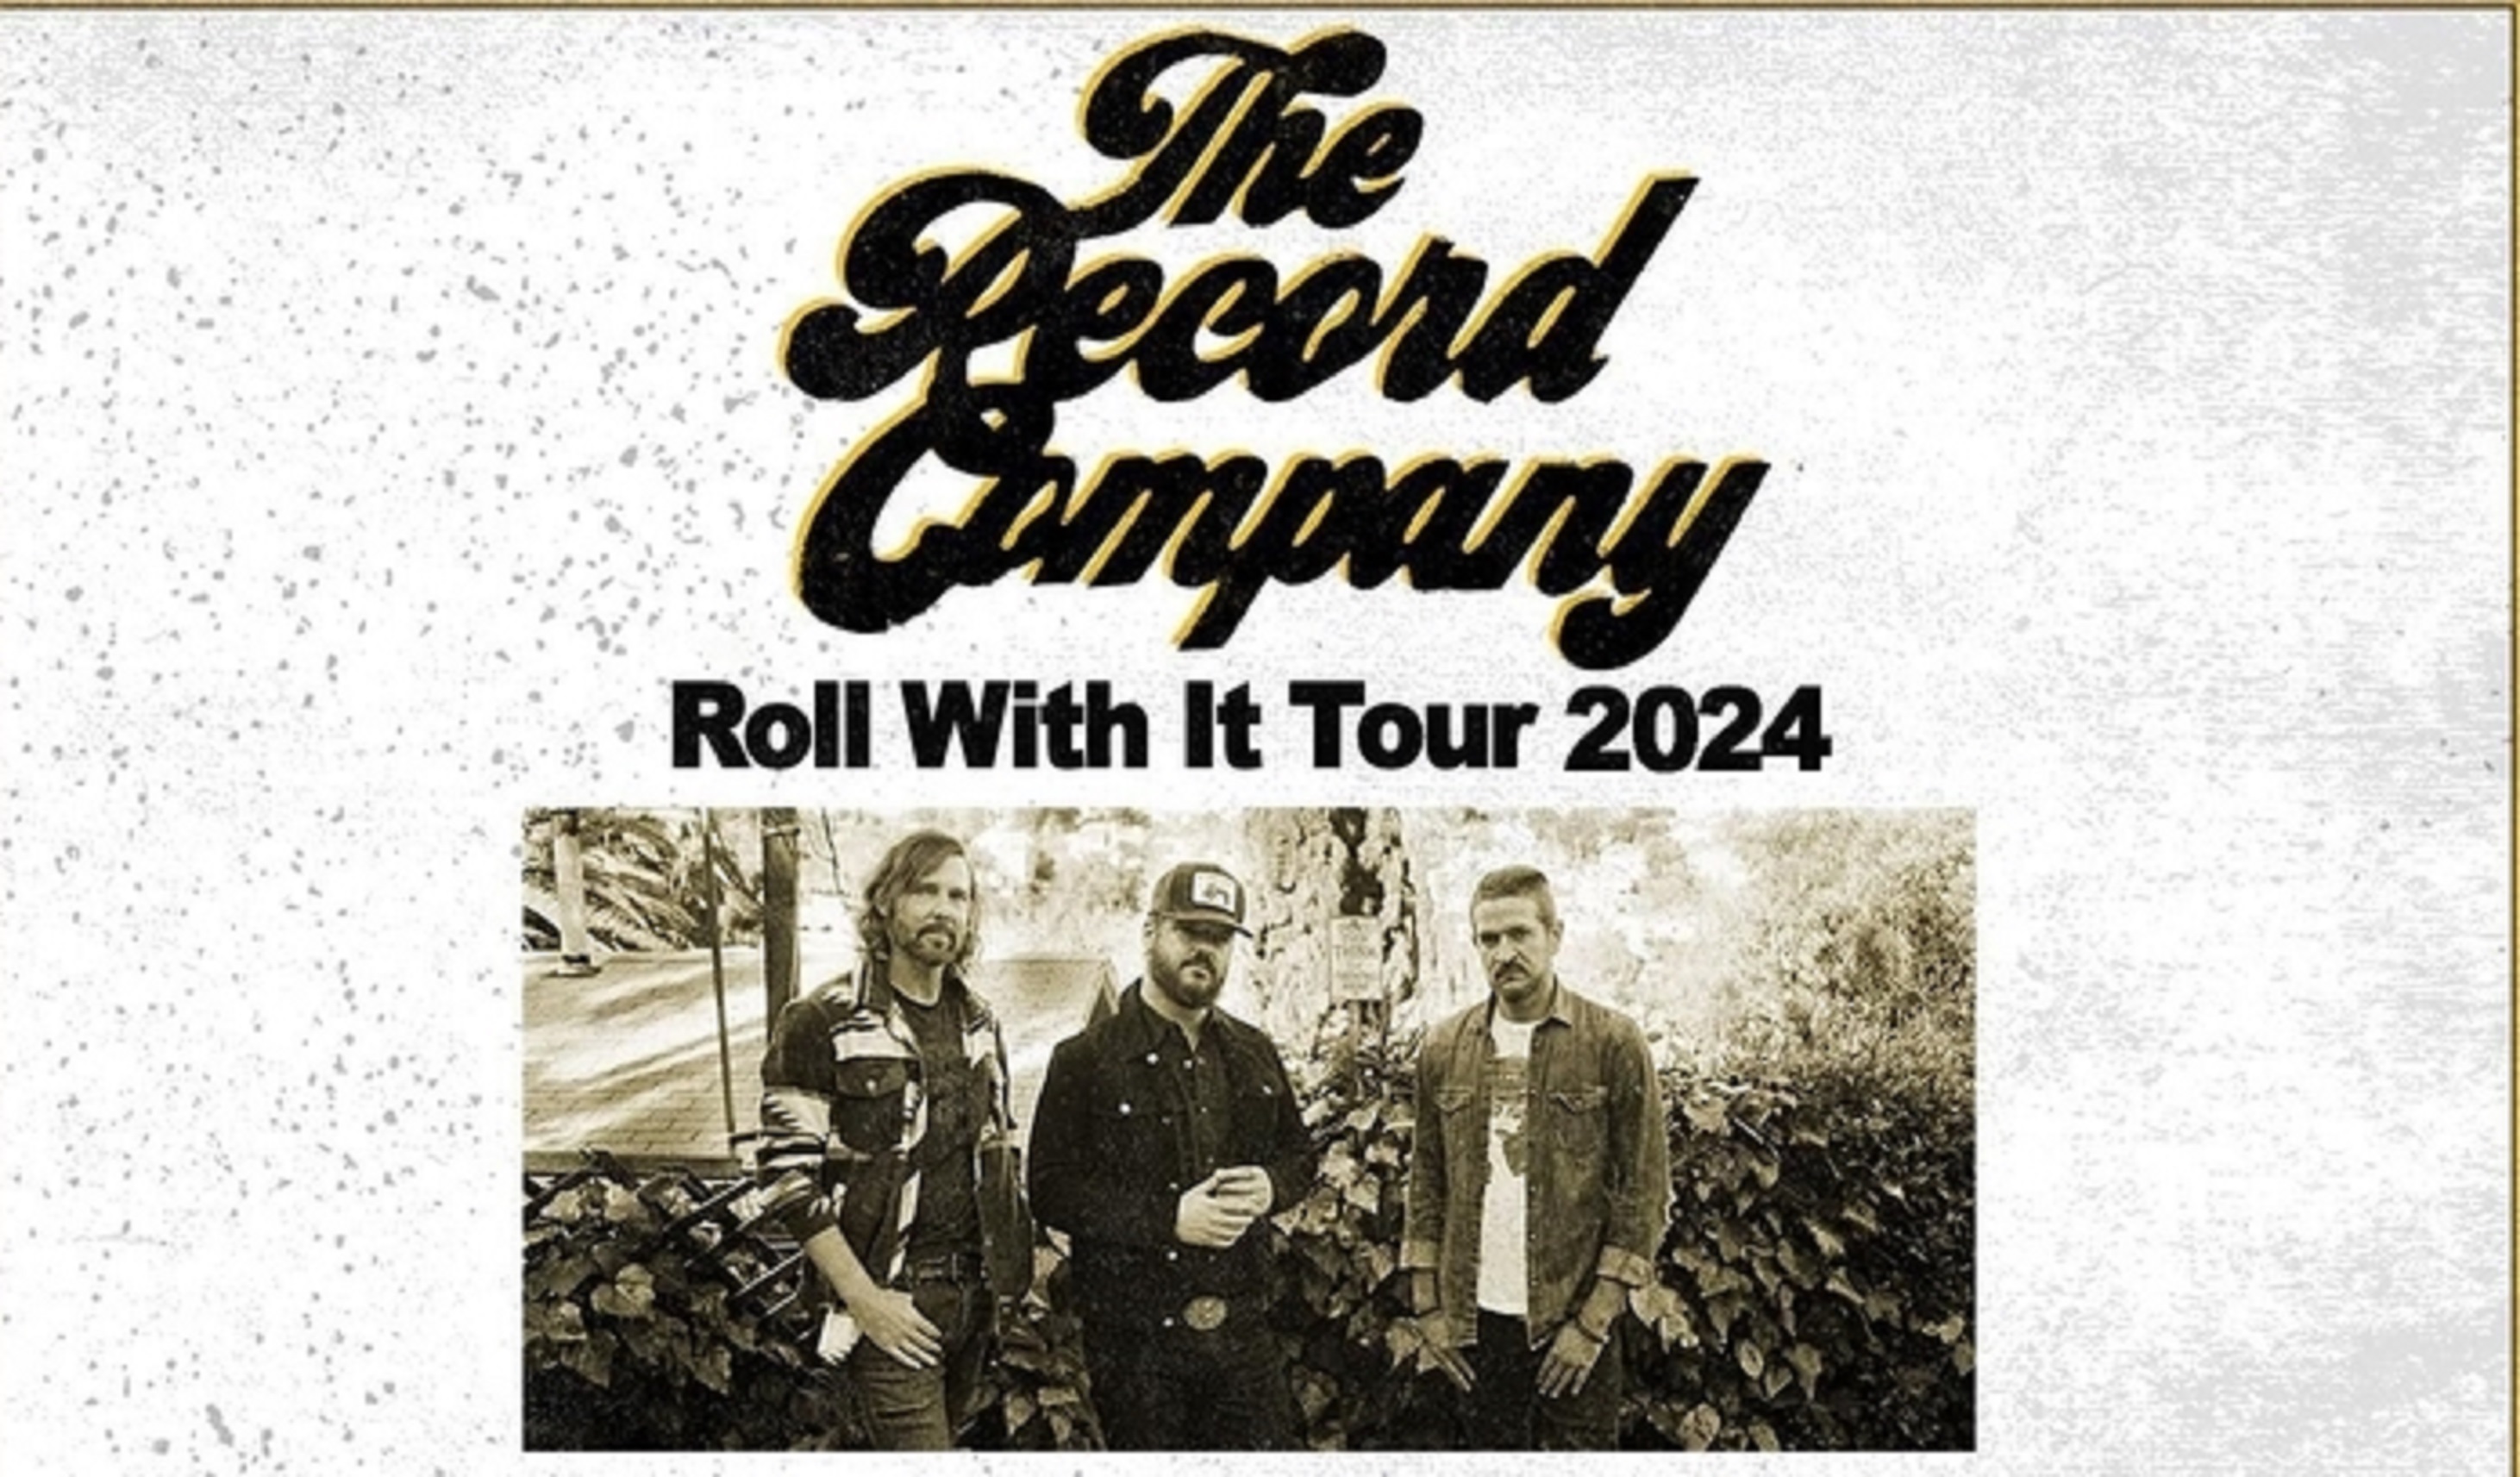 The Record Company Announce The 2024 “Roll With It” Tour